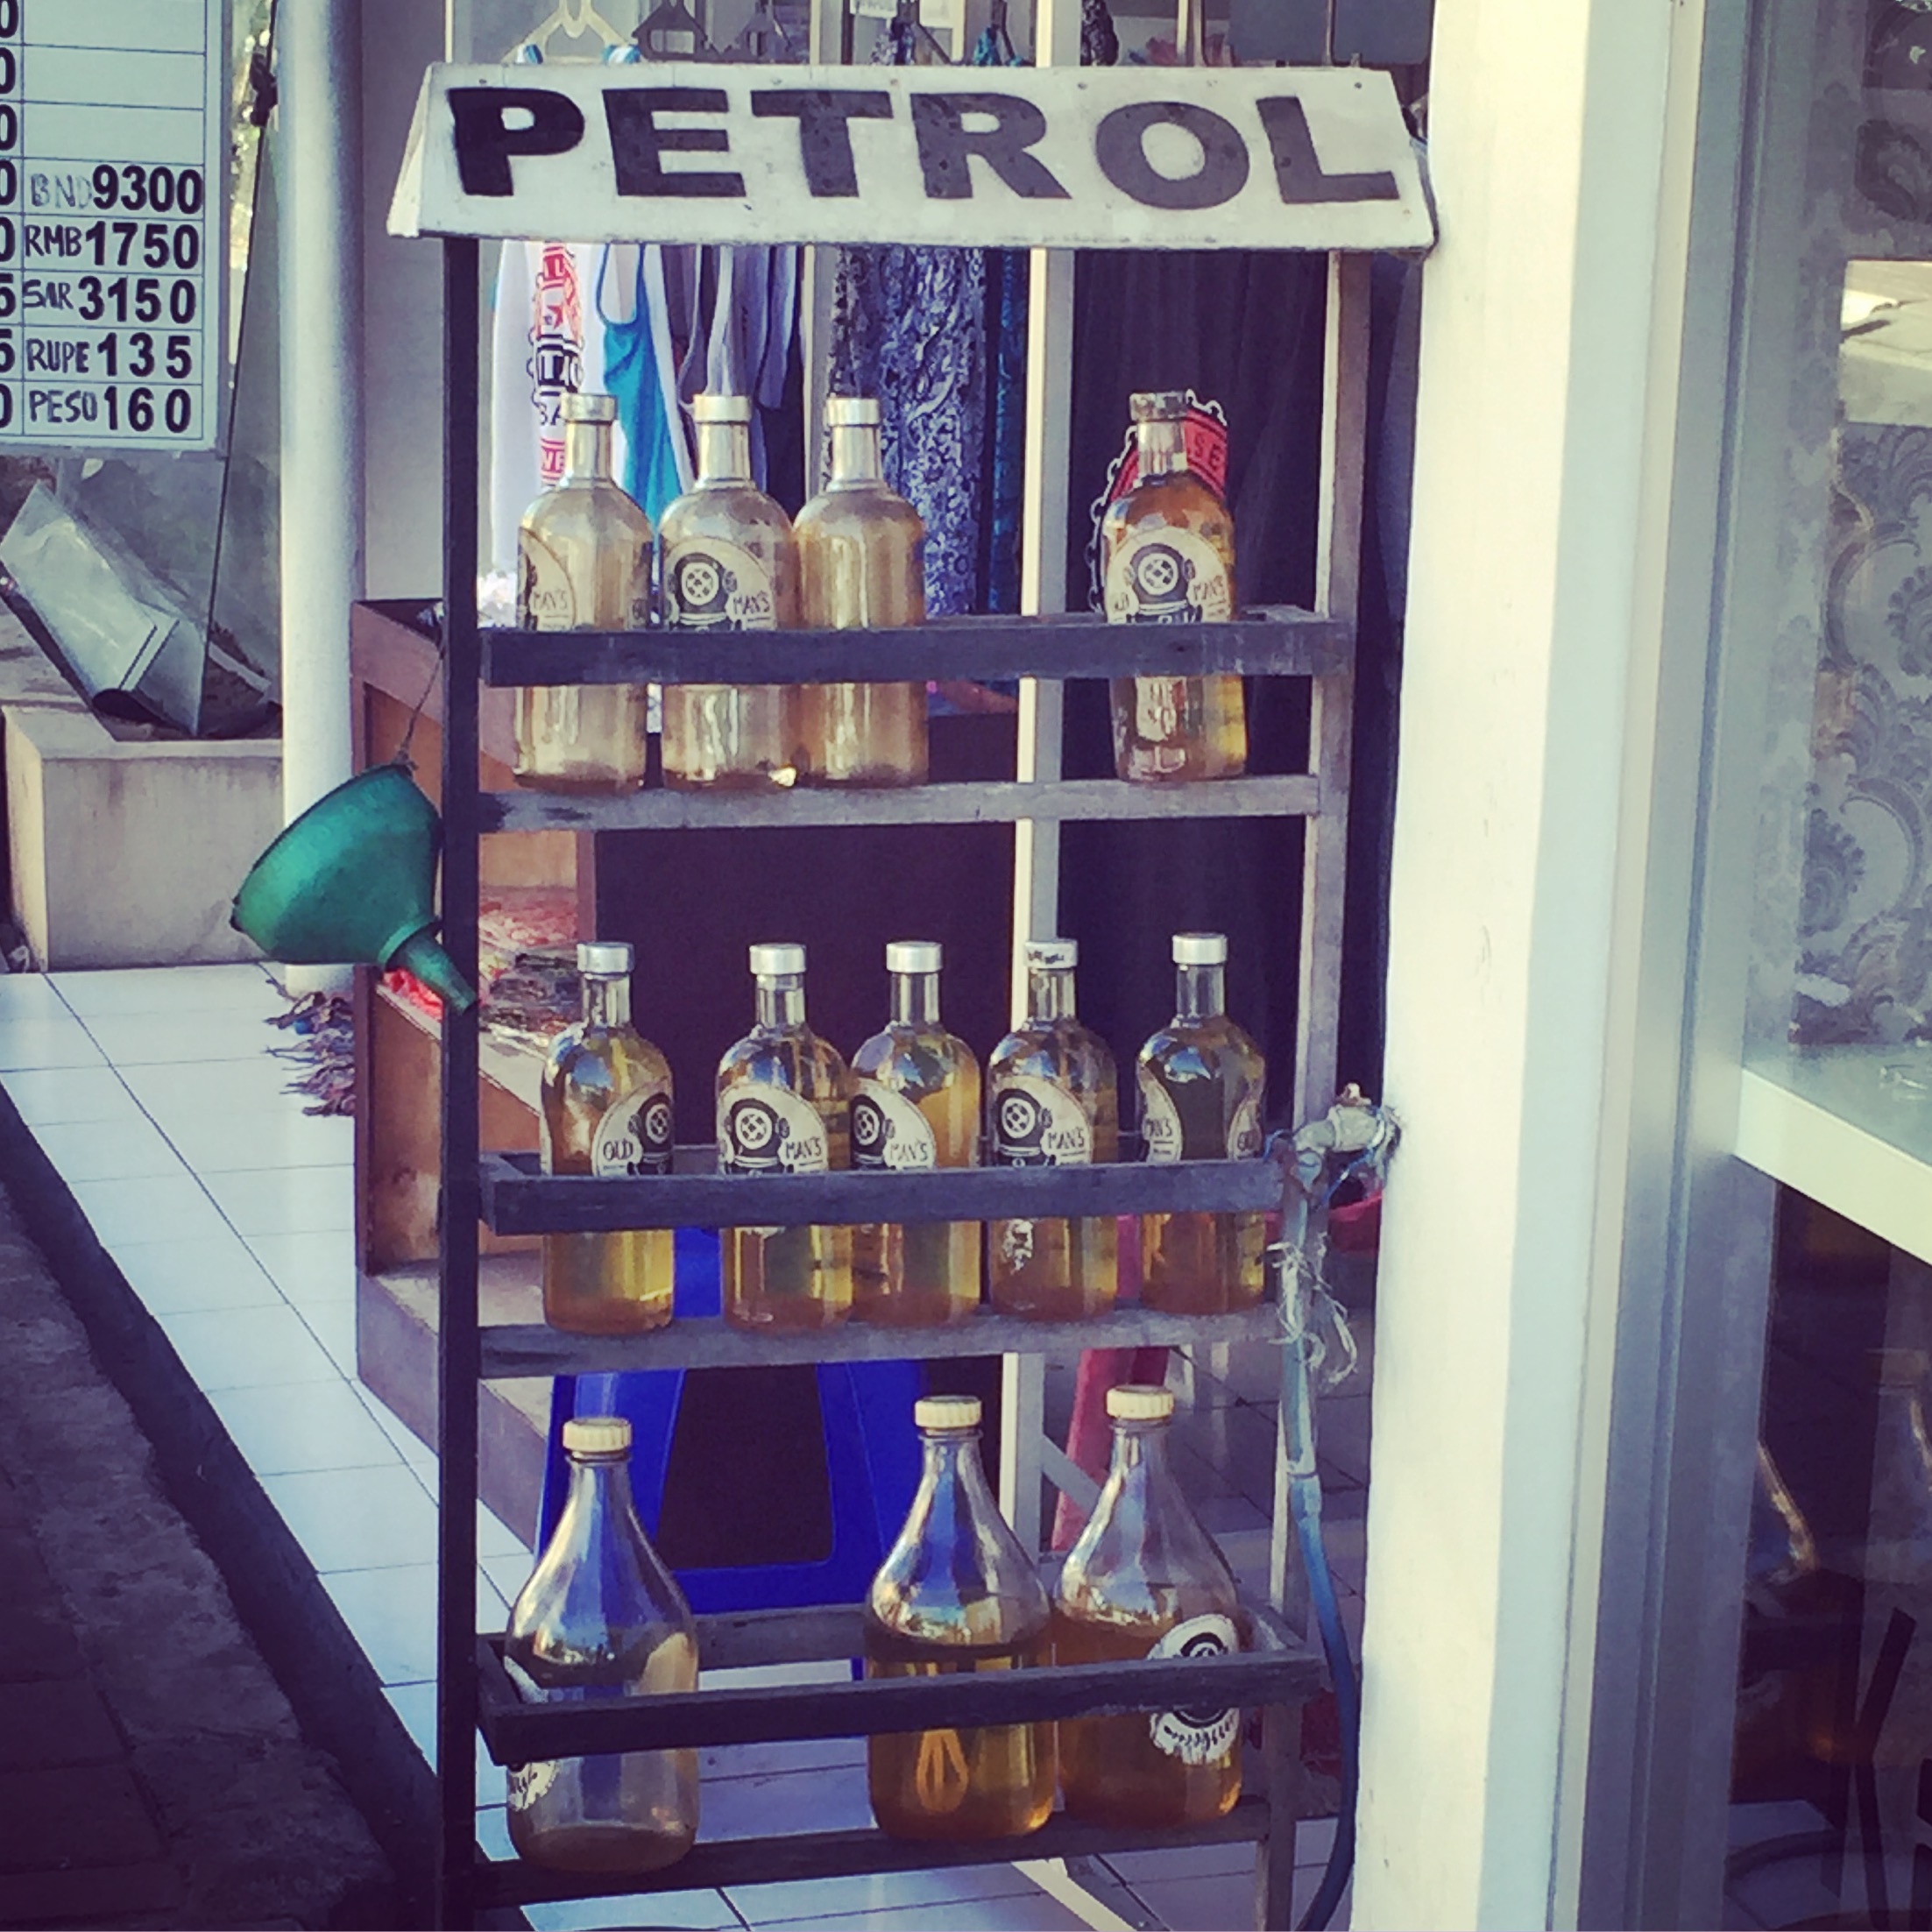 Petrol for sale